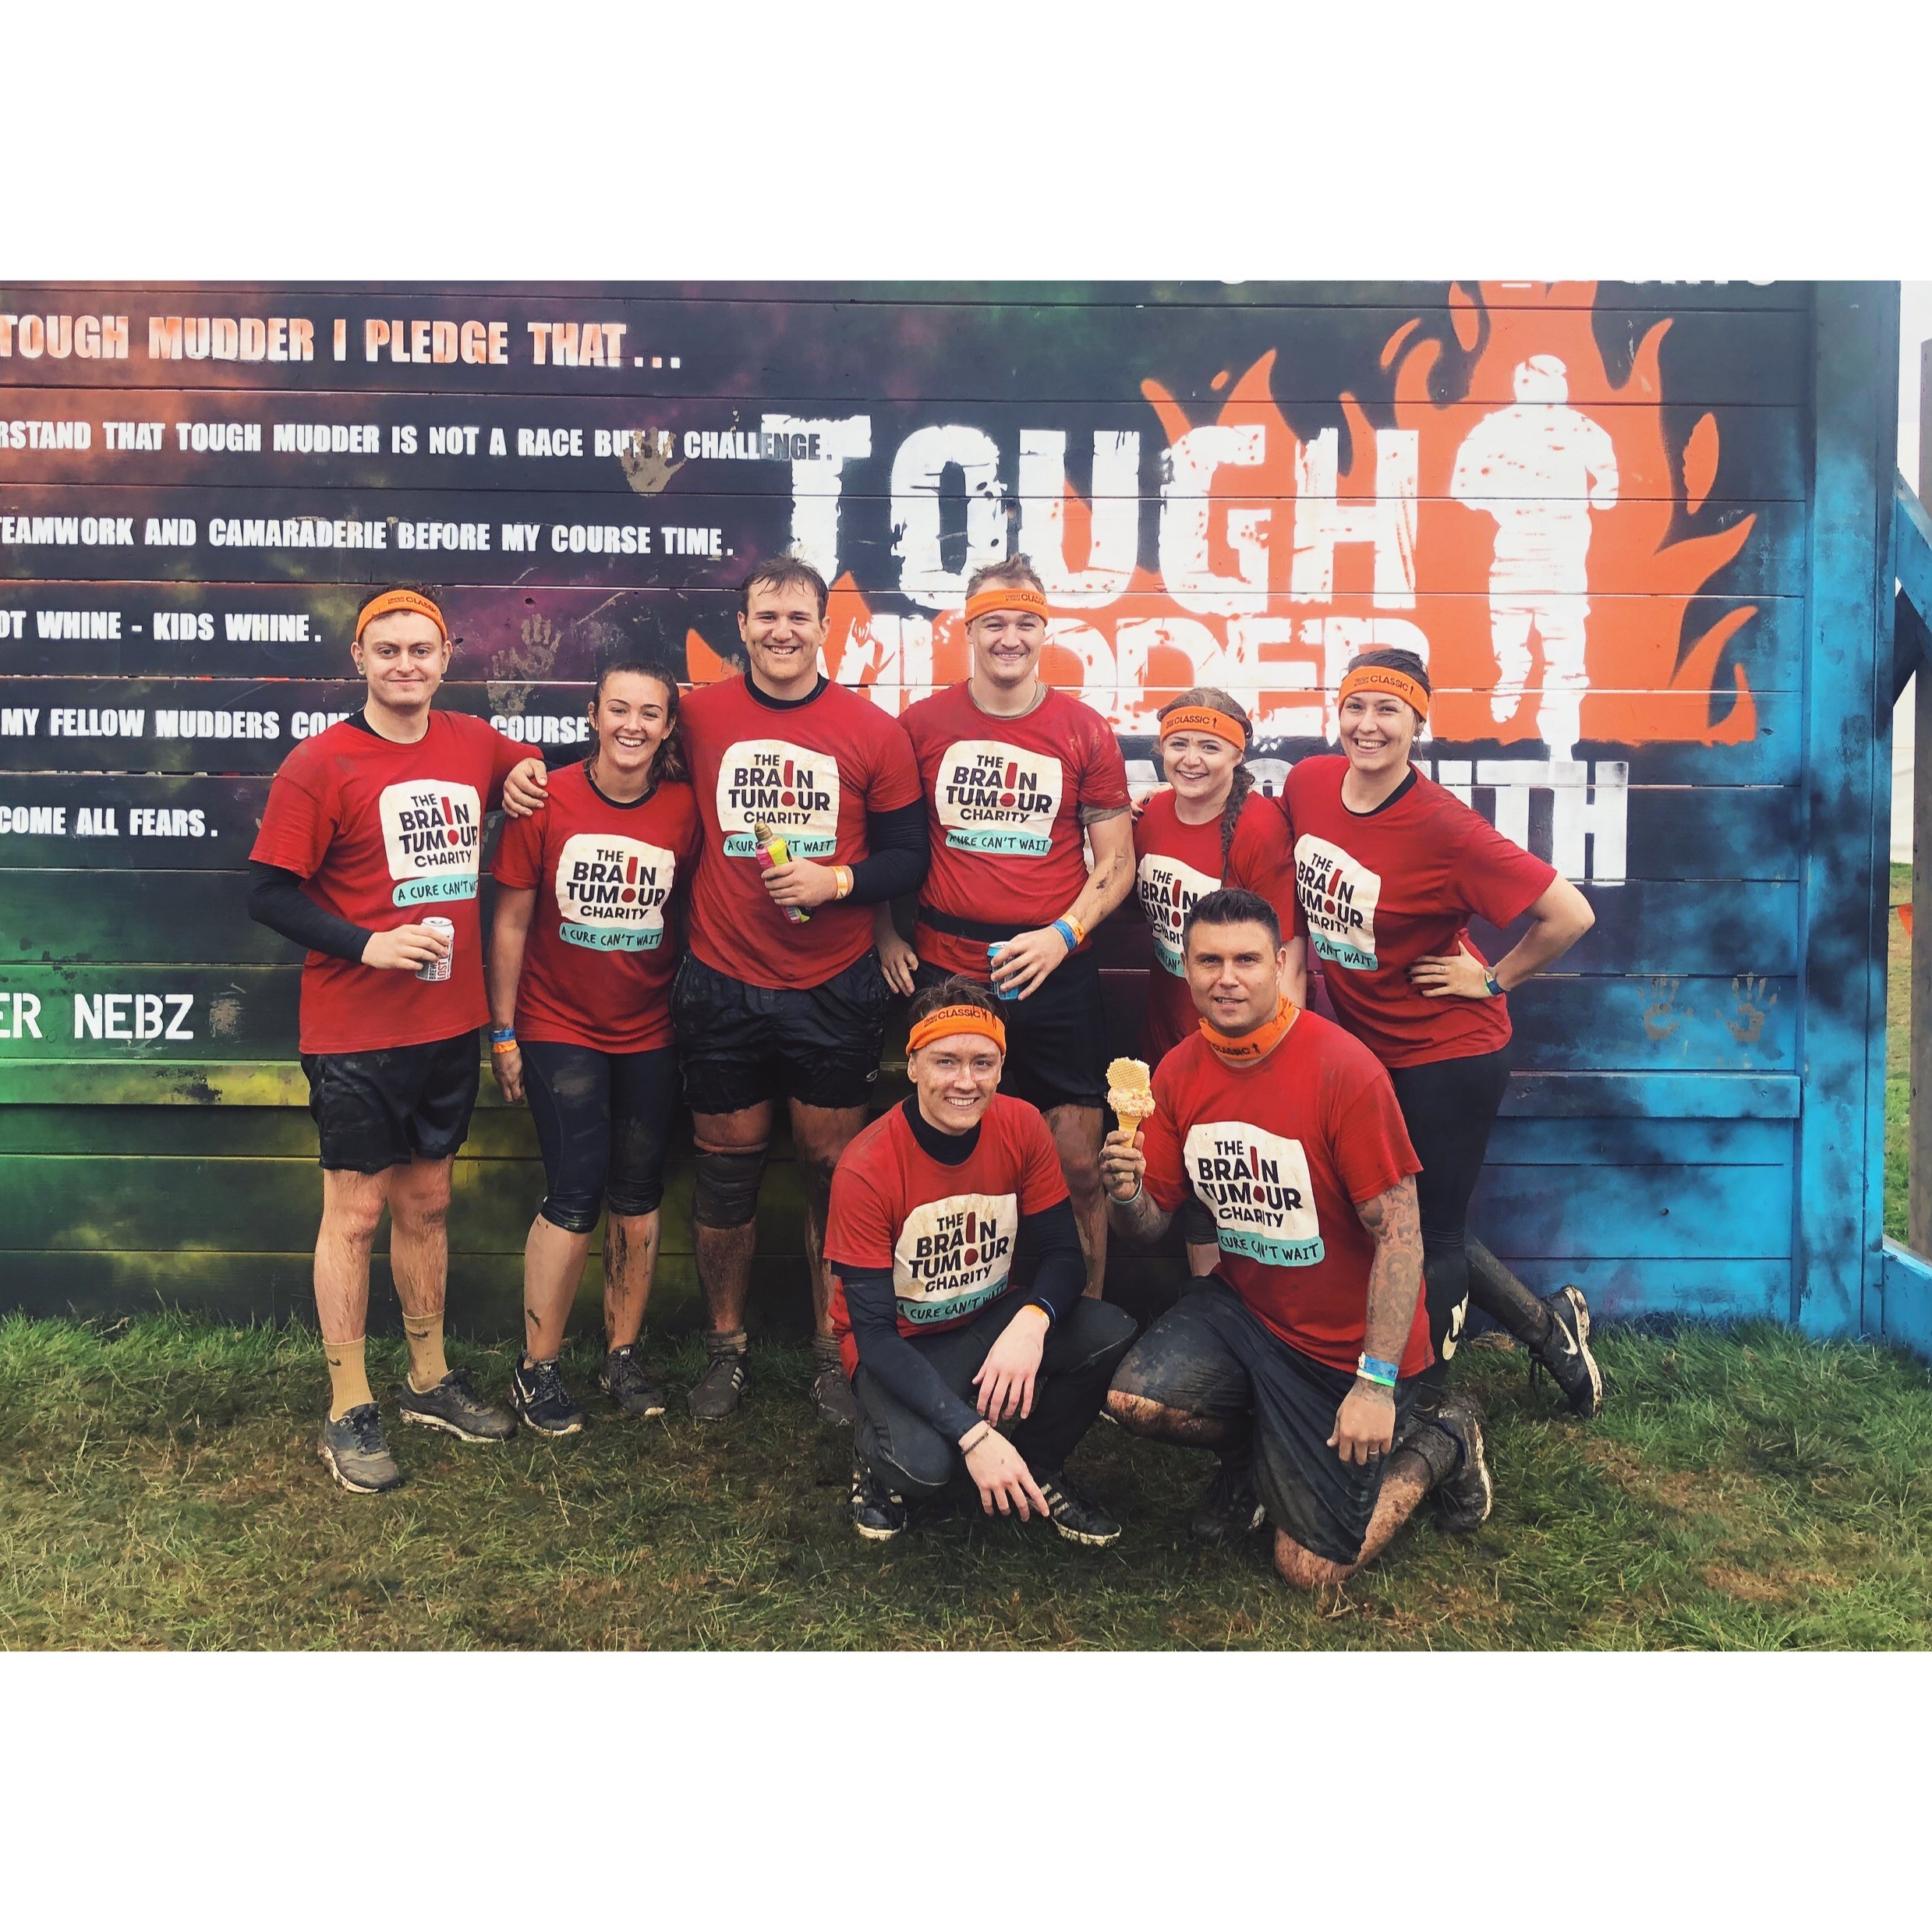 Some of the Spectrum IT team after completing tough mudder